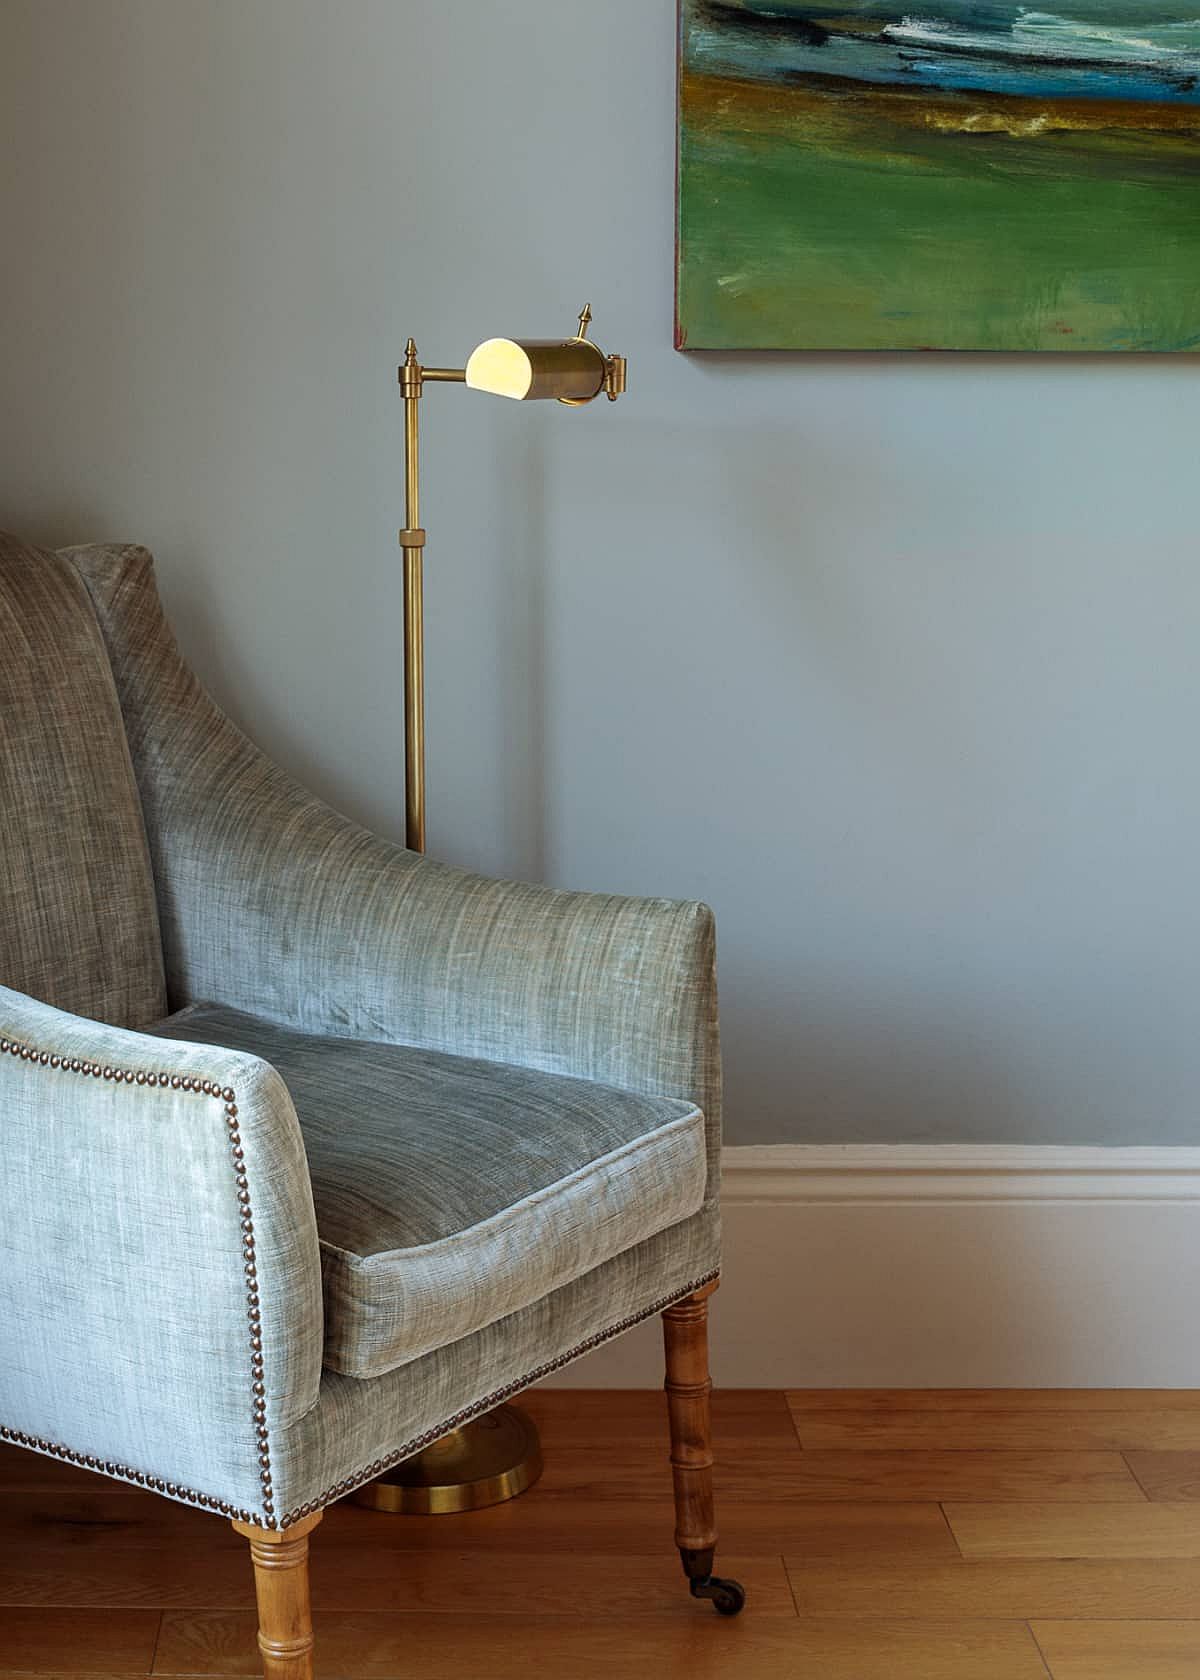 Reading-nook-with-comfy-chair-and-slim-floor-lamp-that-brings-metallic-glitz